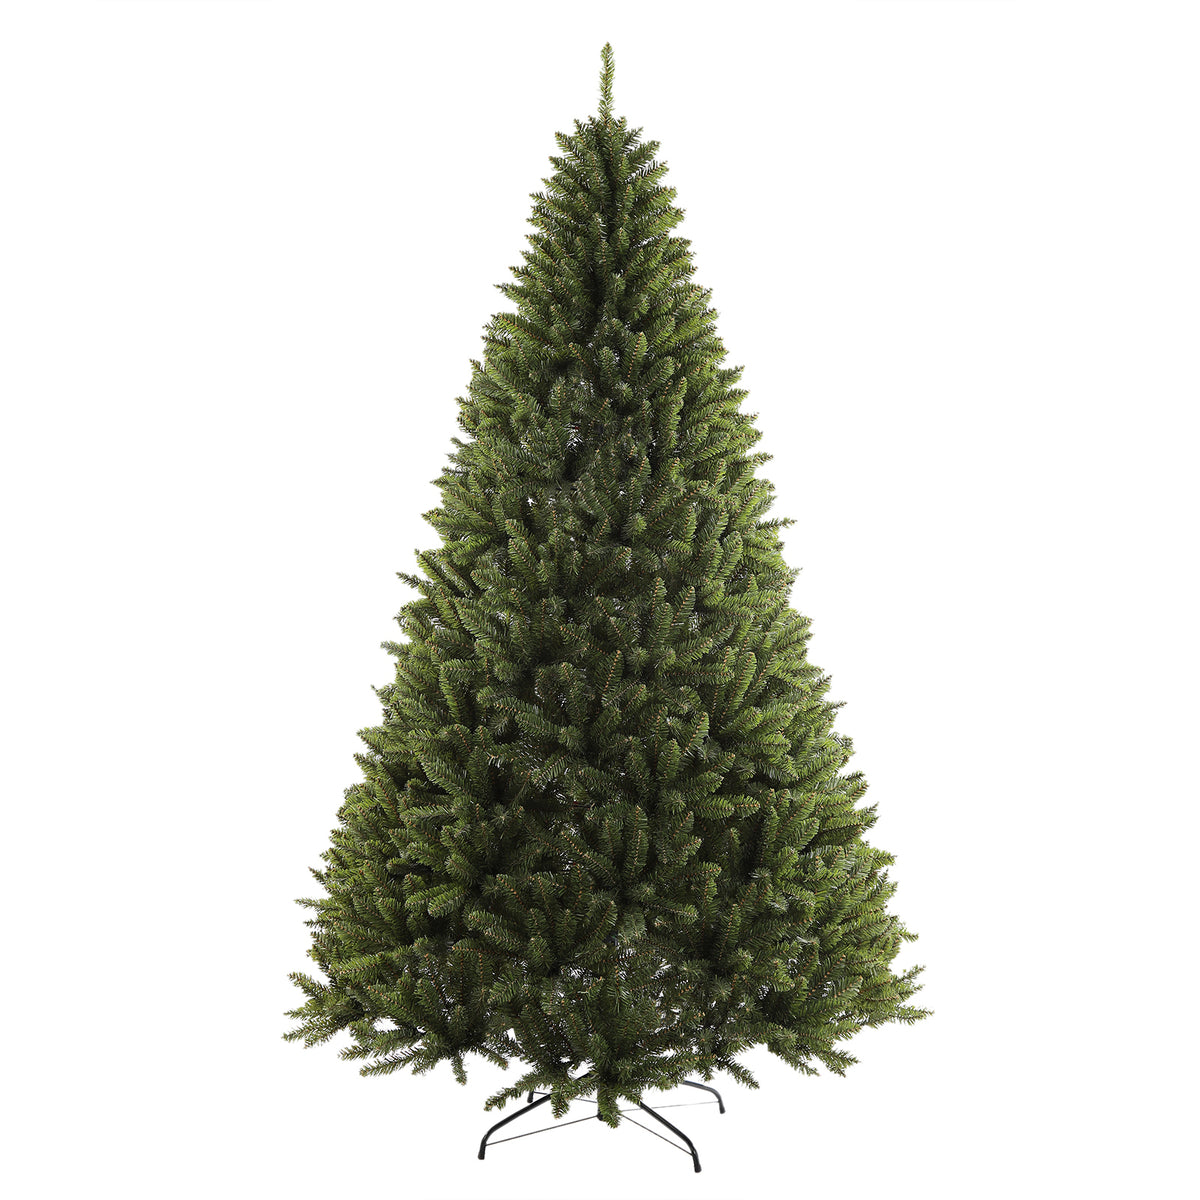 9ft Christmas Tree Artificial Full Xmas Trees, Green, for Holiday, Home, Office, Party Decoration, 2830 Branch Tips Metal Hinges & Foldable Base